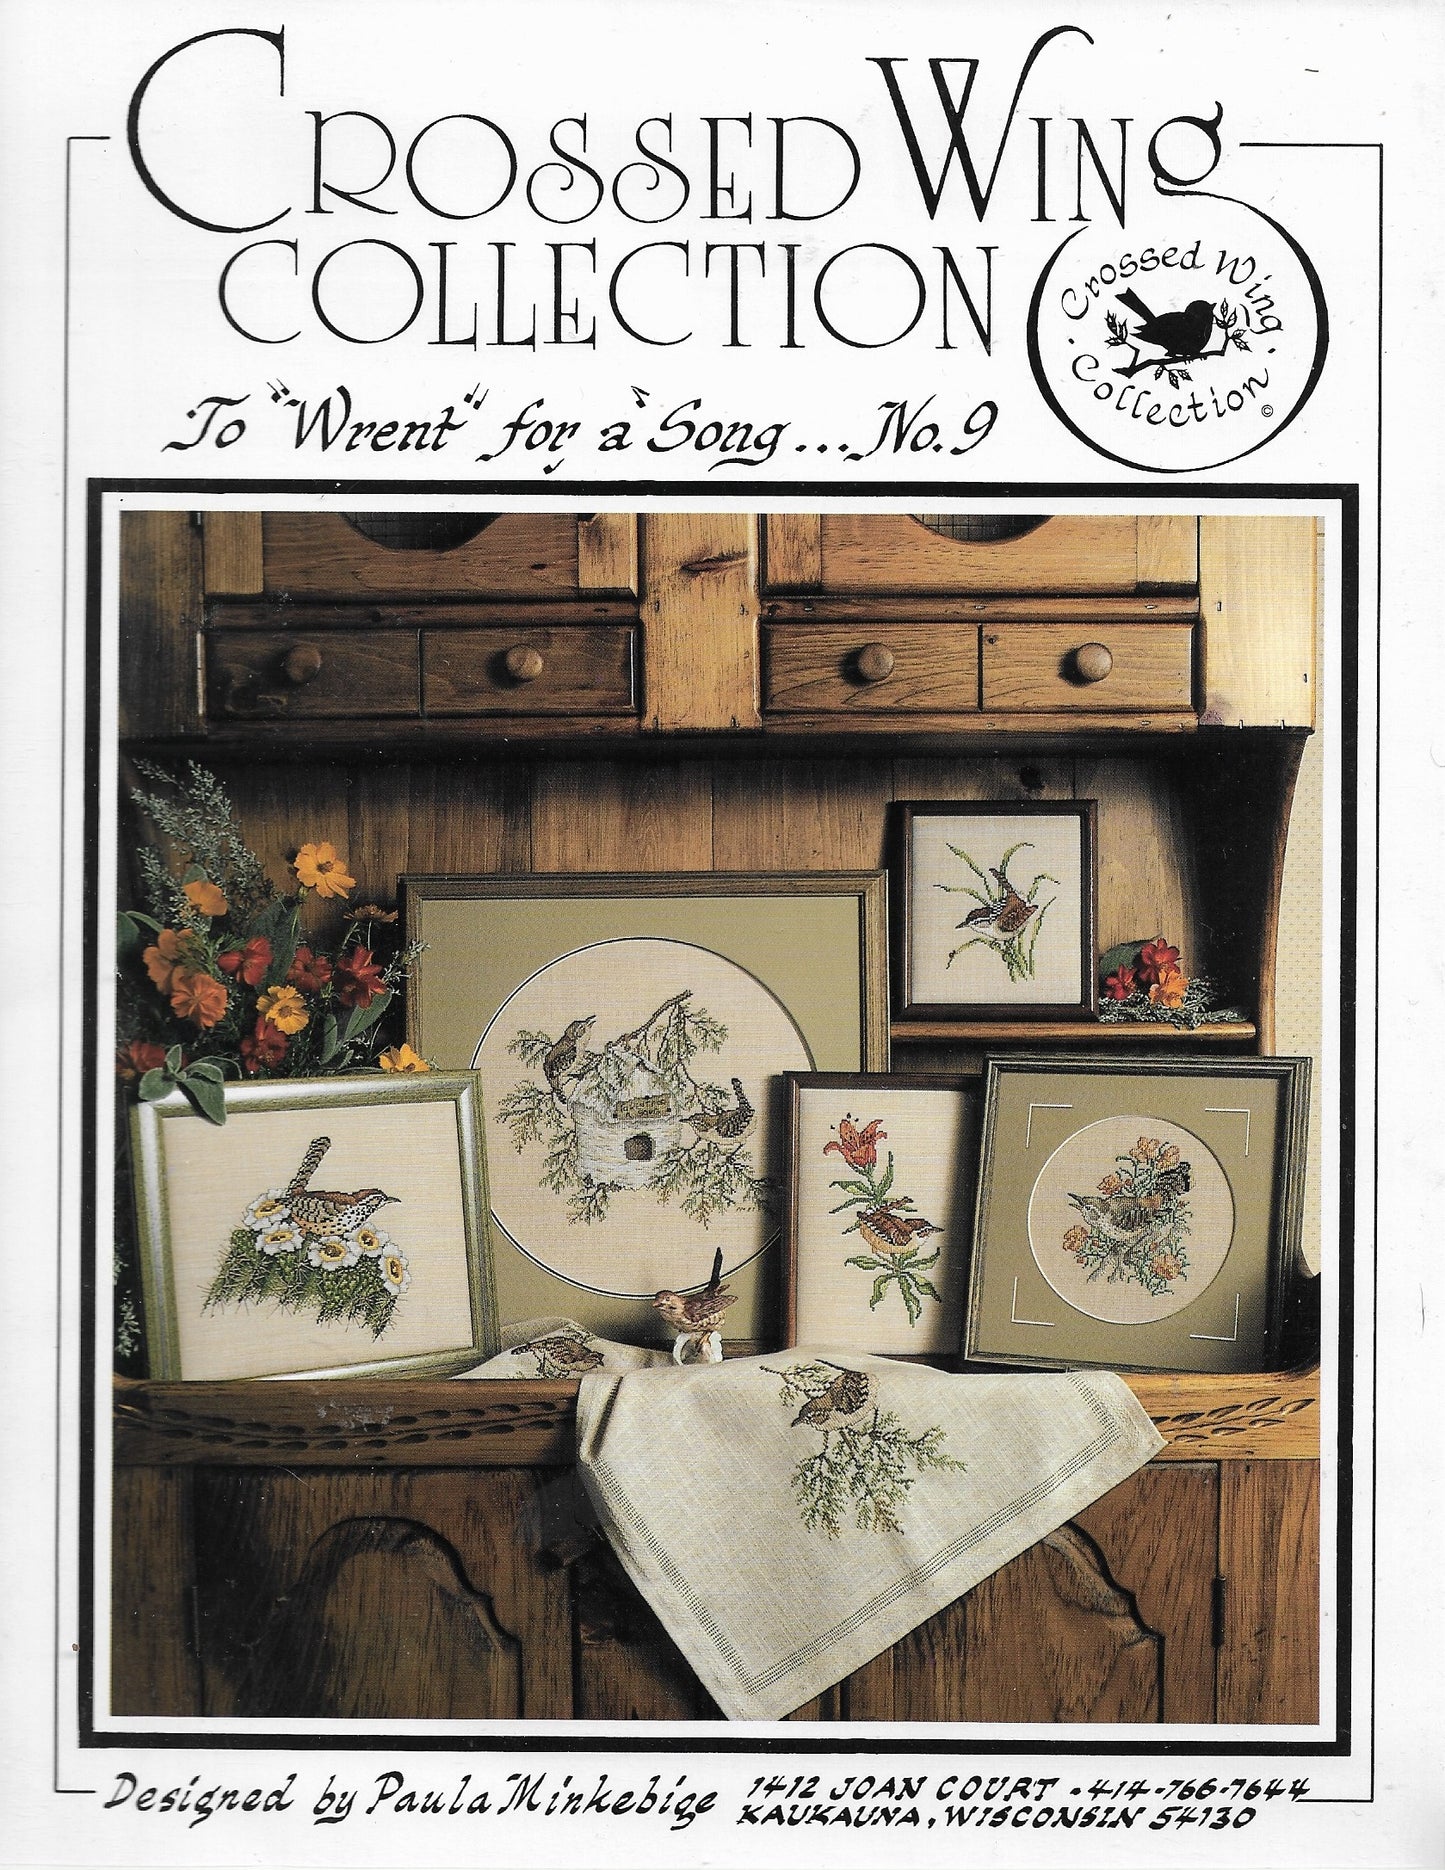 Crossed Wing Collection To Wrent for a Song 9 bird cross stitch pattern